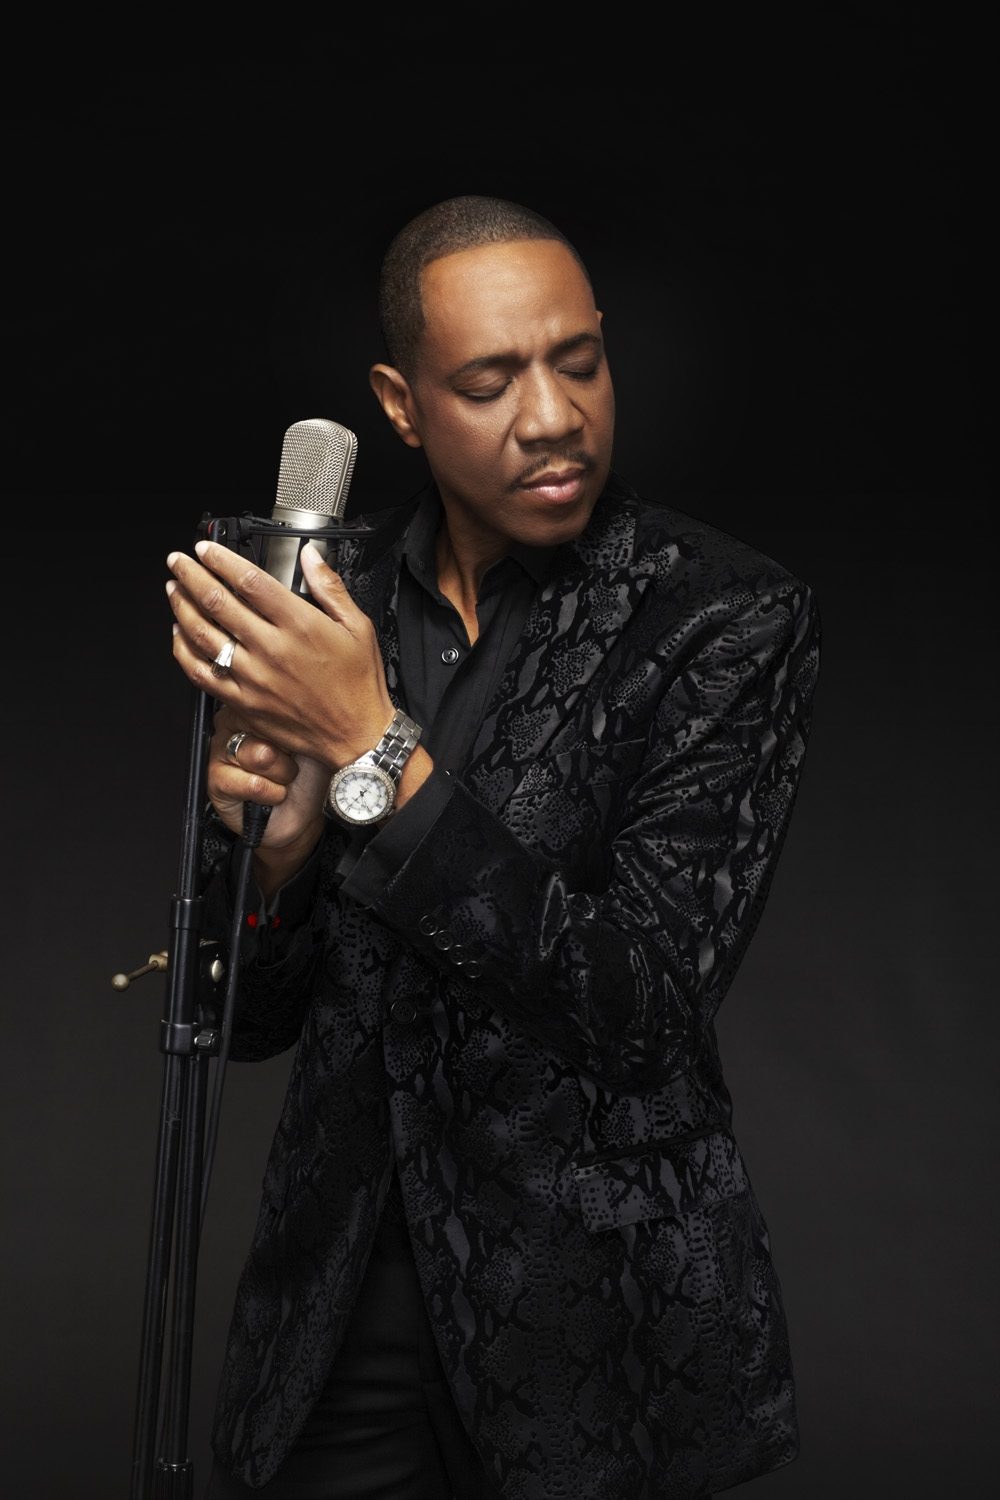 Jazz and R&B vocalist Freddie Jackson closes the summer season on August 31 aboard NYC's long running Smooth Cruise series featuring contemporary jazz and R&B.